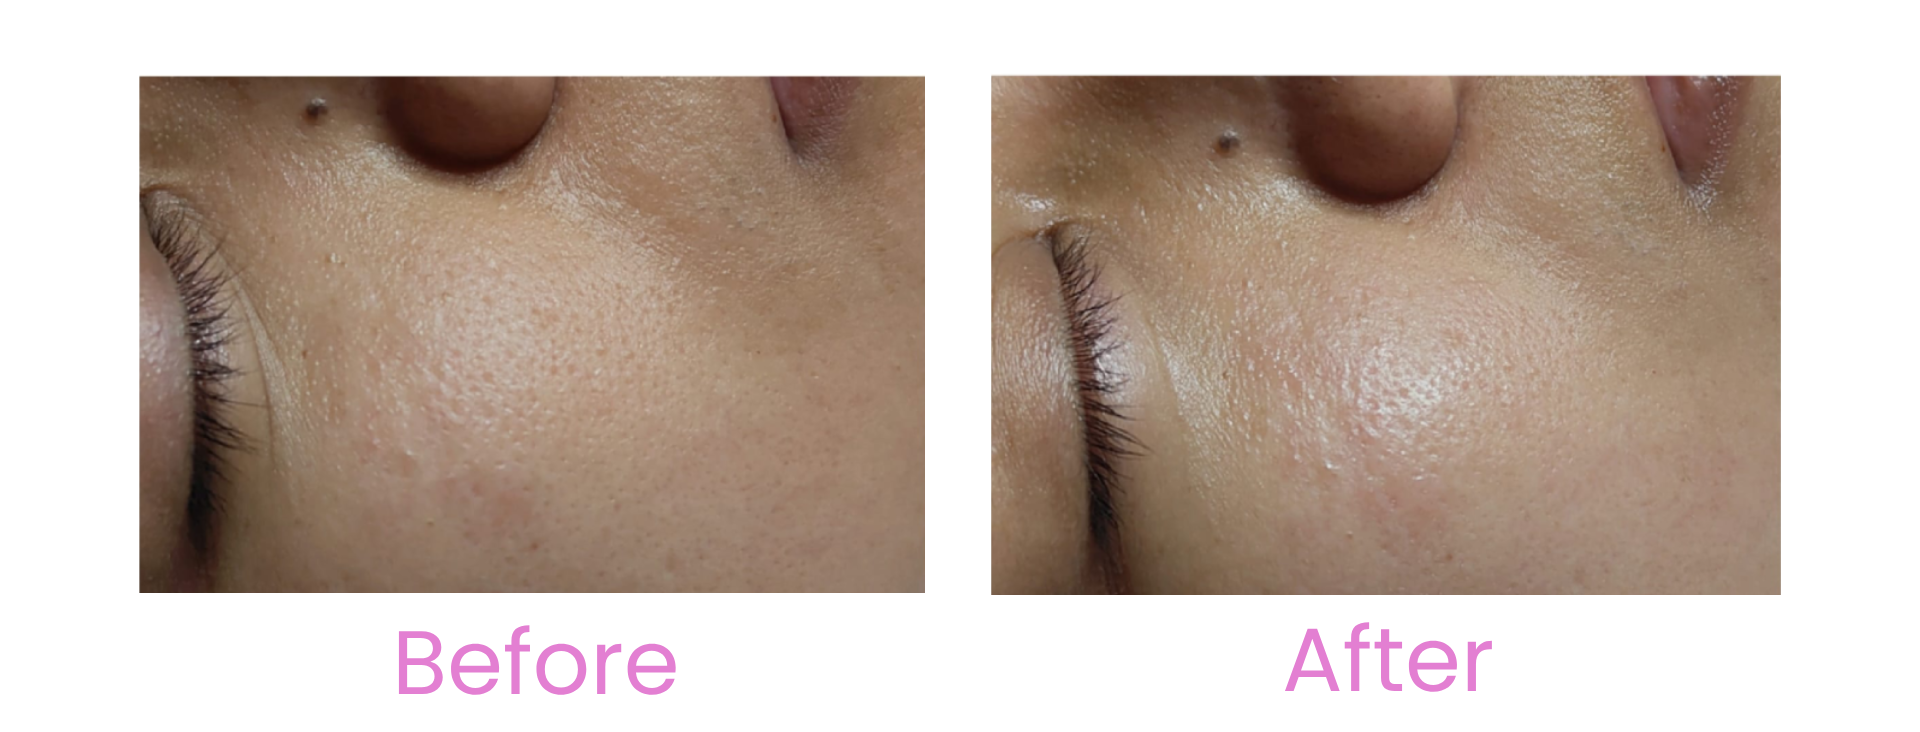 Asterspring singapore age reversal collagen treatment before & after